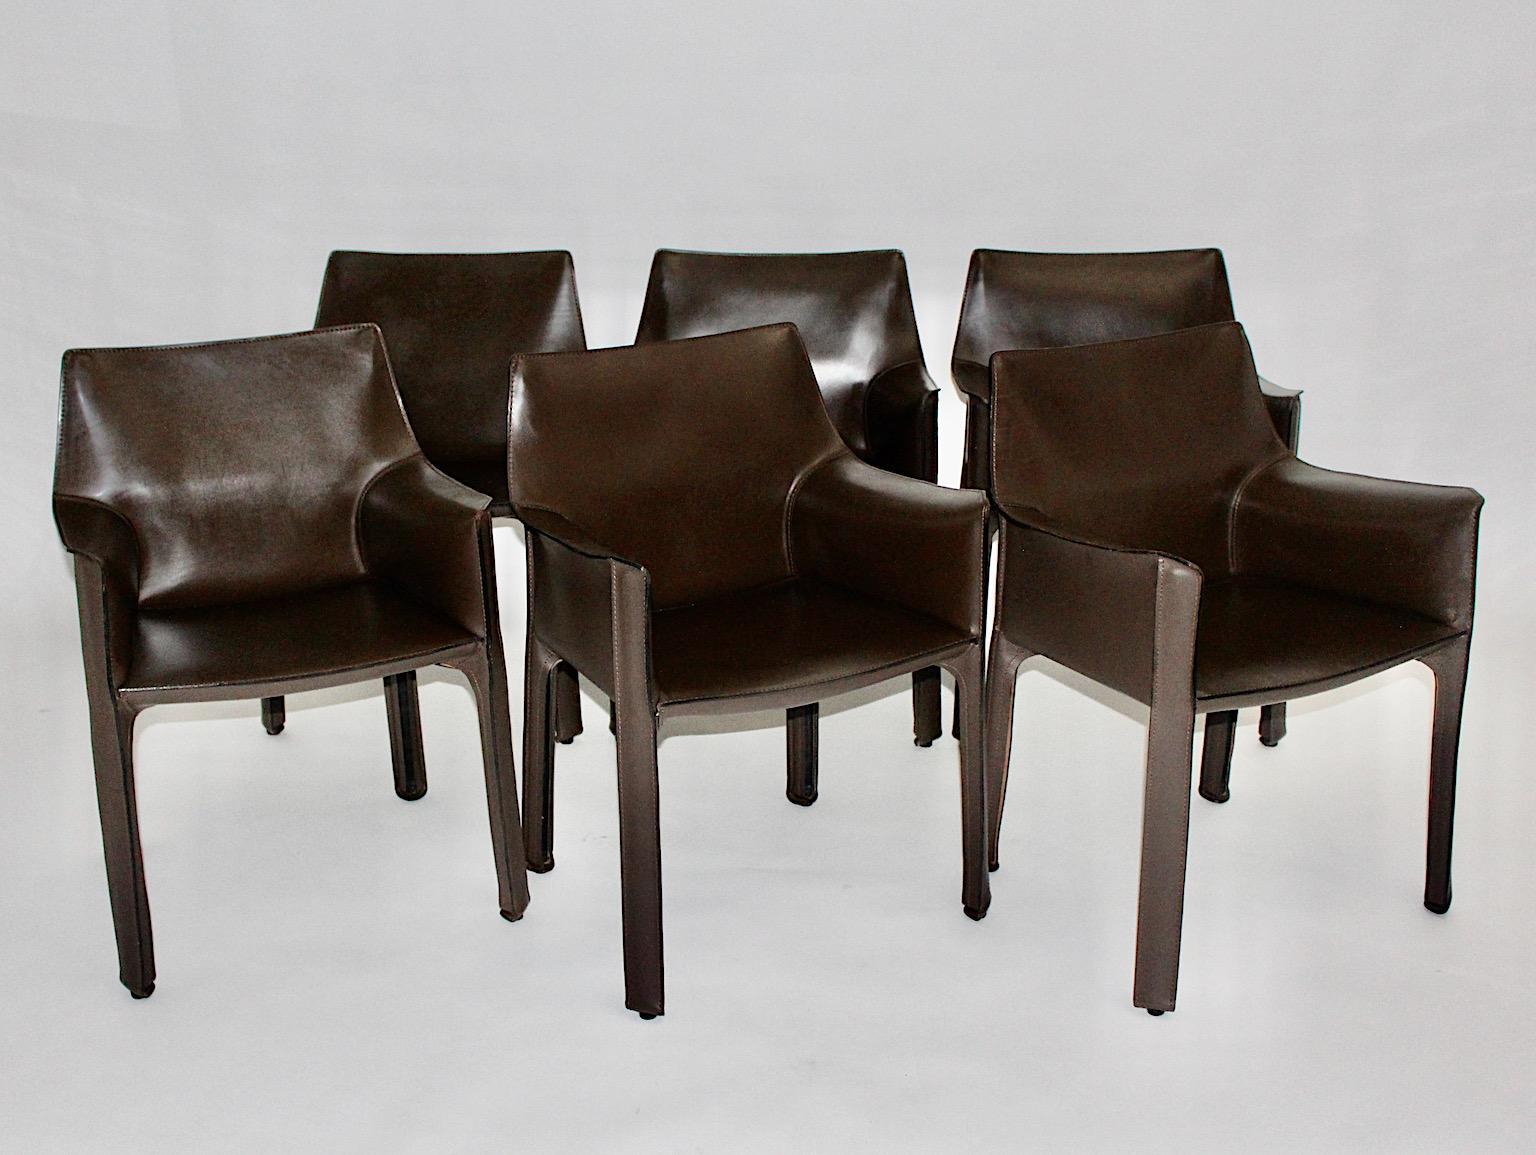 Italian Mario Bellini Vintage Chocolate Brown Leather Dining Chairs Cassina 1970s Italy For Sale